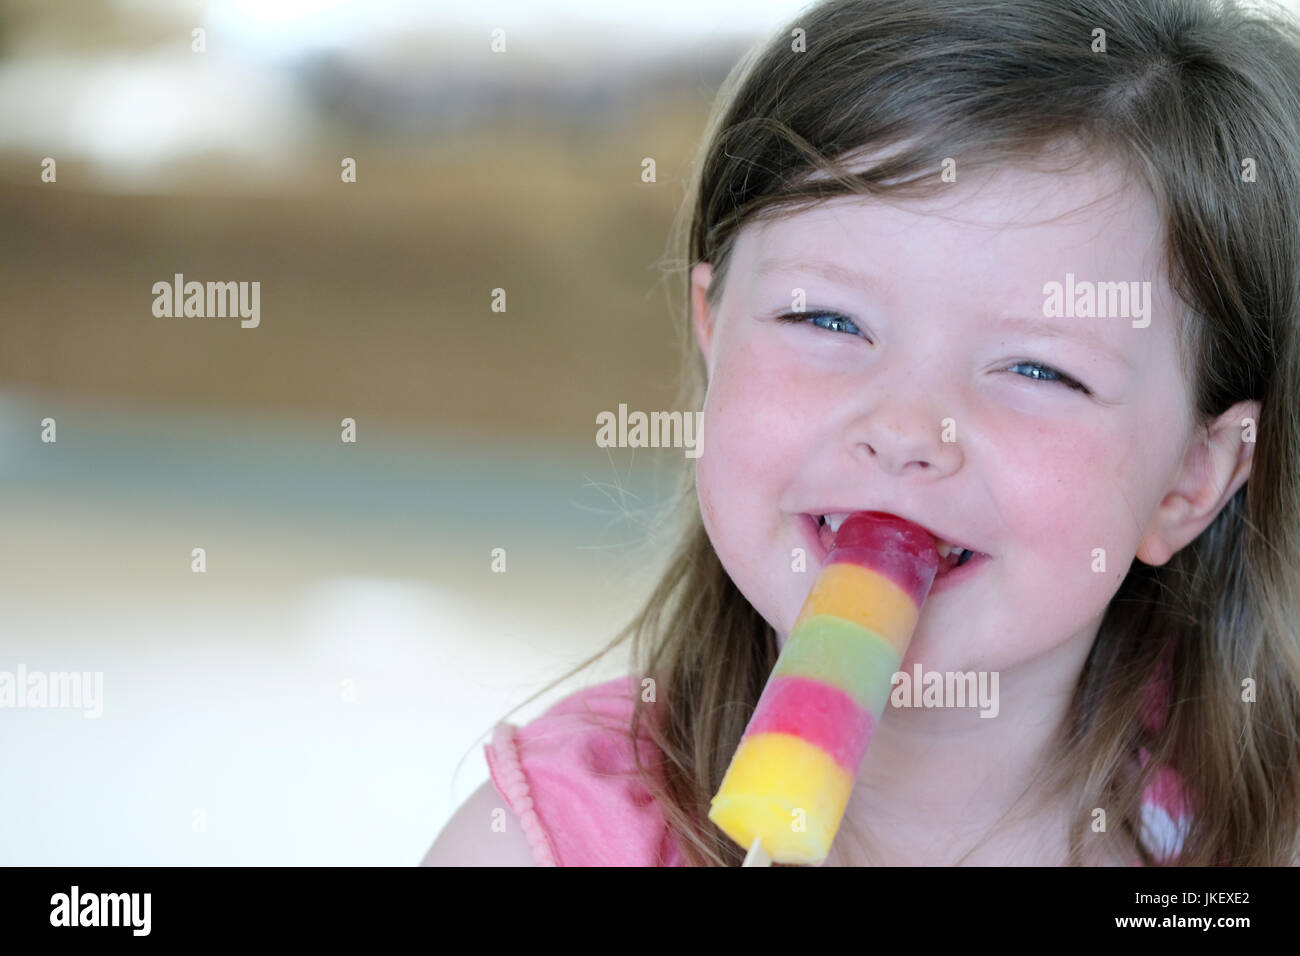 A young child enjoying a multi-coloured ice lolly. taken indoors in natural light Stock Photo